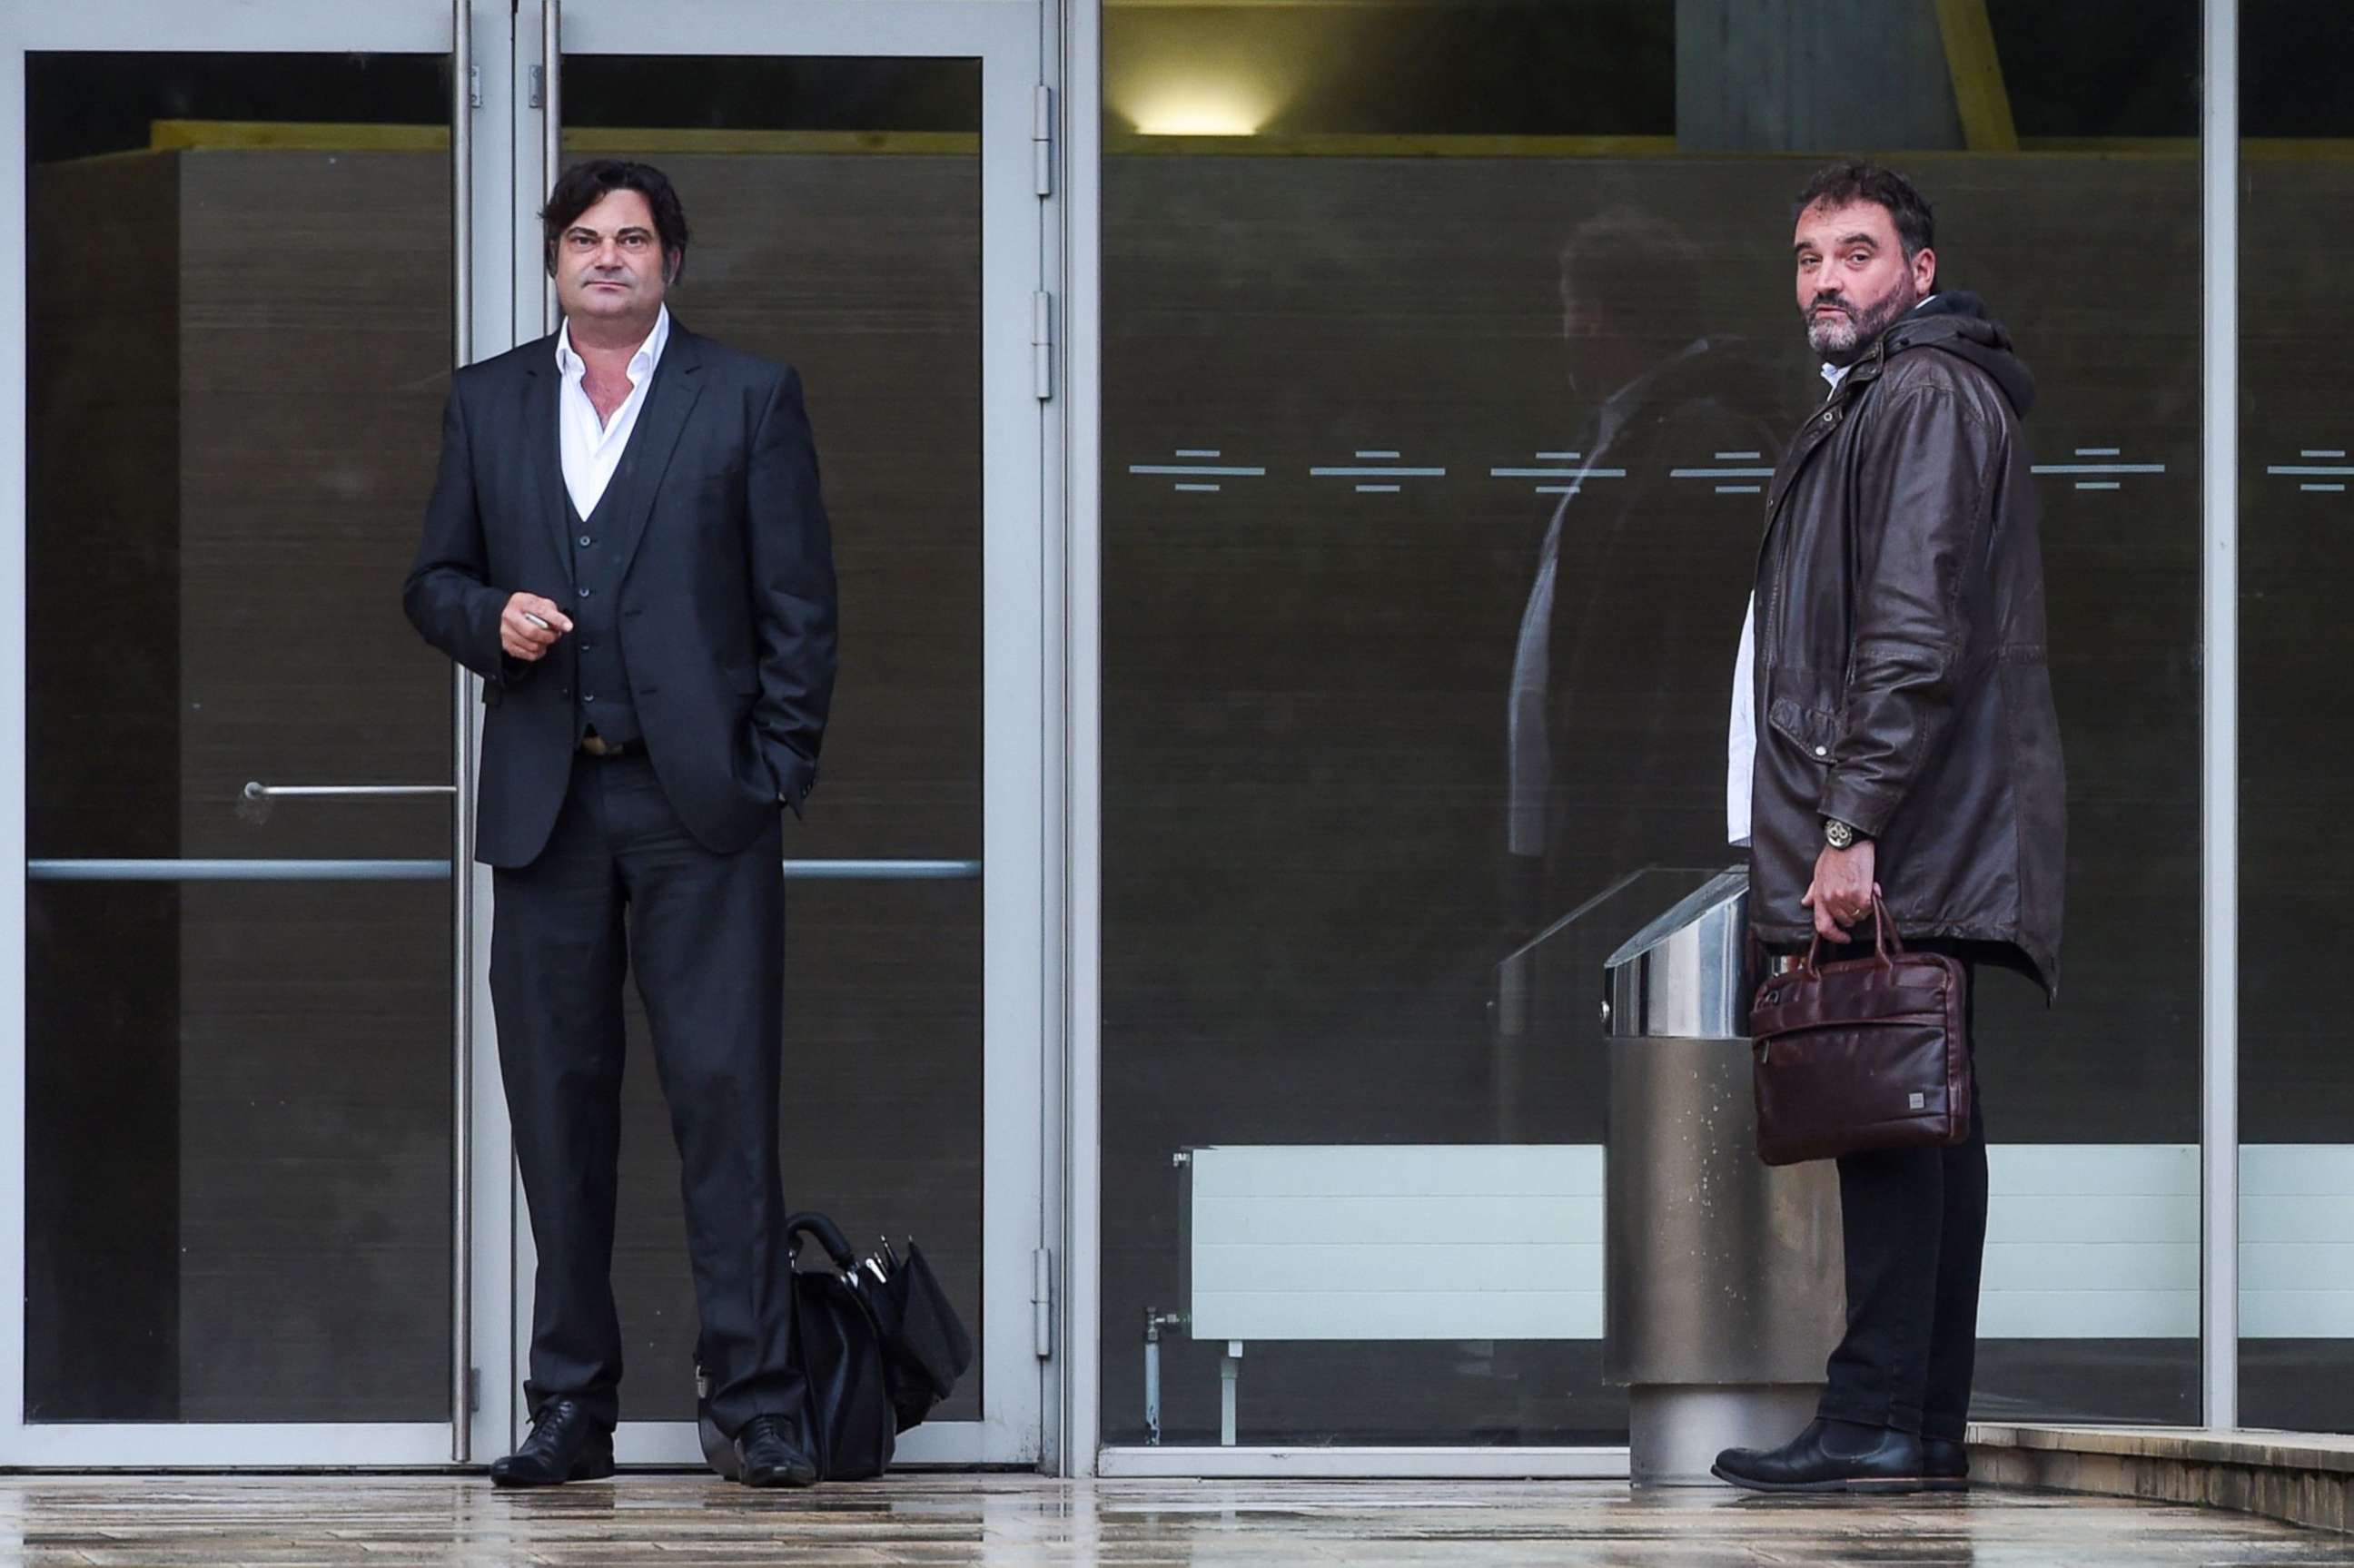 PHOTO: Frederic Pechier, right and his lawyer Randall Schwerdorffer, left, stand outside the Besancon courthouse in Paris on June 12, 2019.